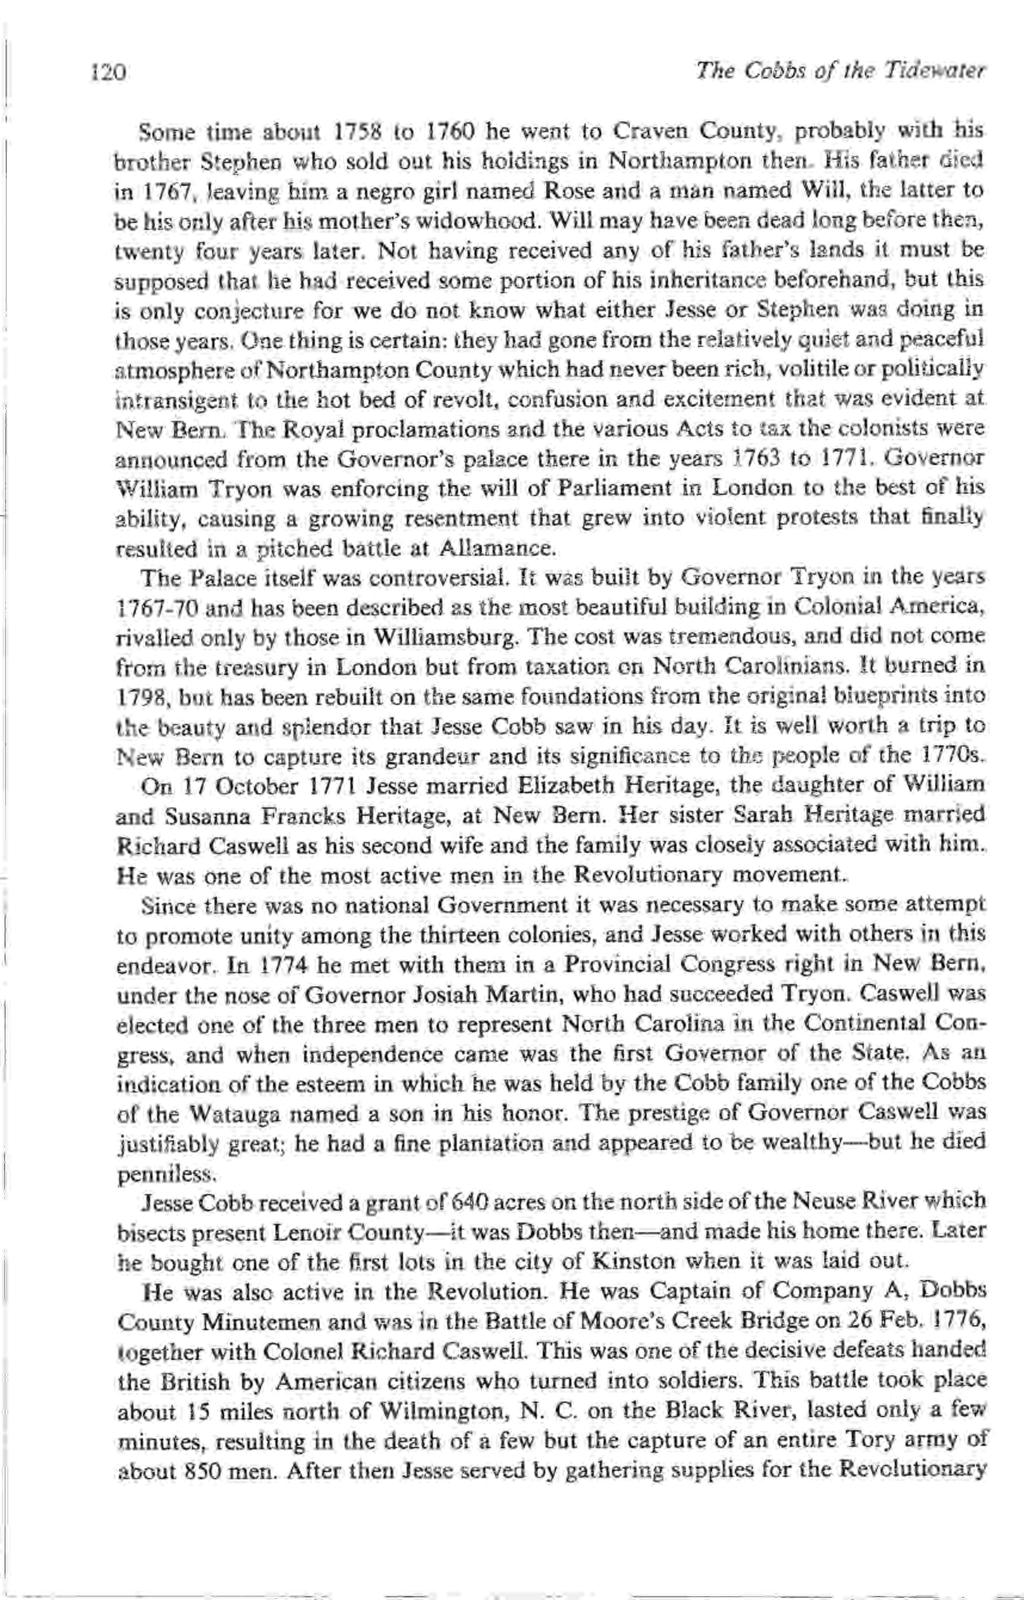 120 The Cobbs of the Tidewater Some time about 1758 to 1760 he went to Craven County, probably with his brother Stephen who sold out his holdings in Northampton then.